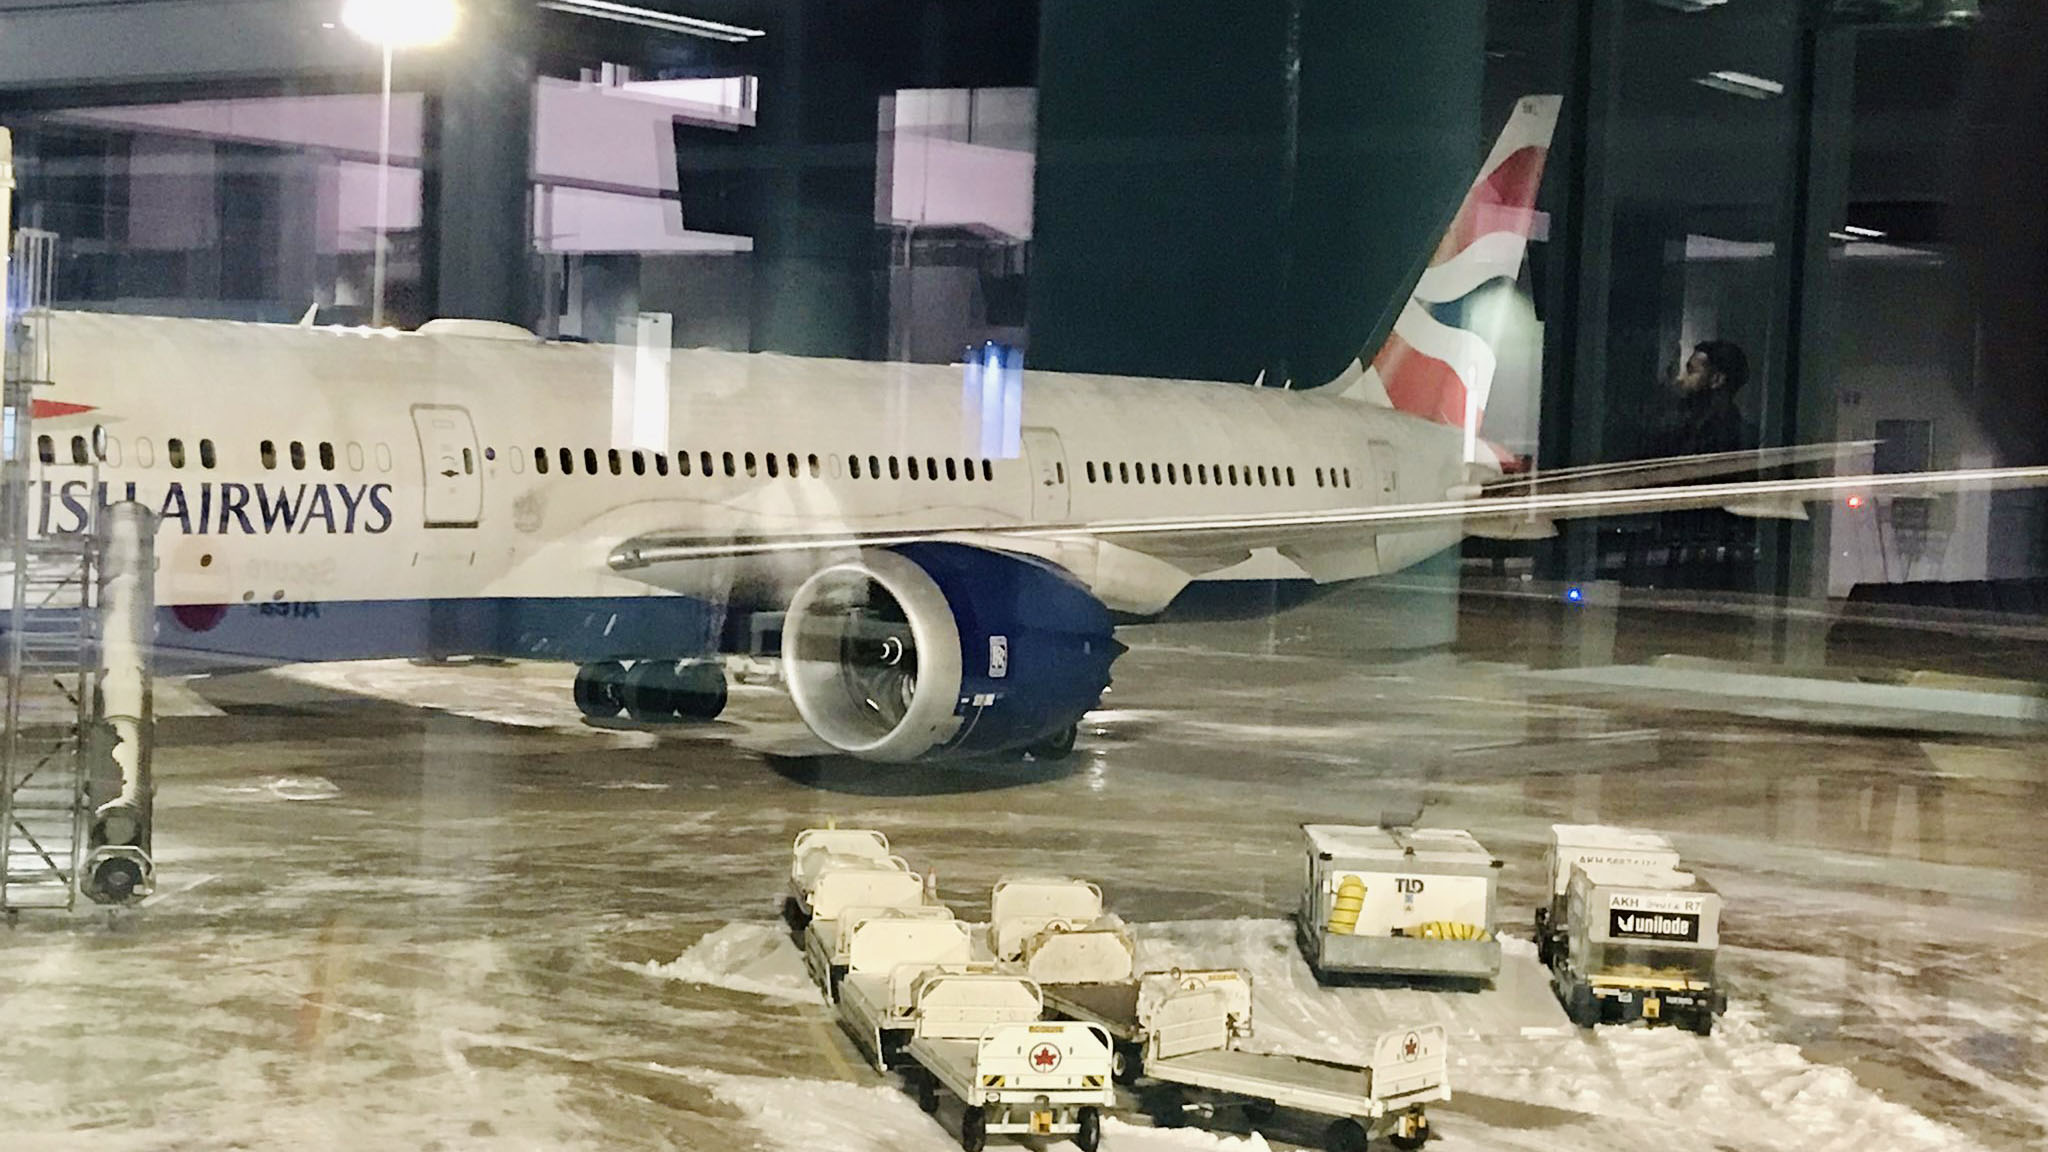 British Airways flight 216 sits at the arrival gate. It is dark outside and there is snow on the ground. The photo is taken through the window of the airport.